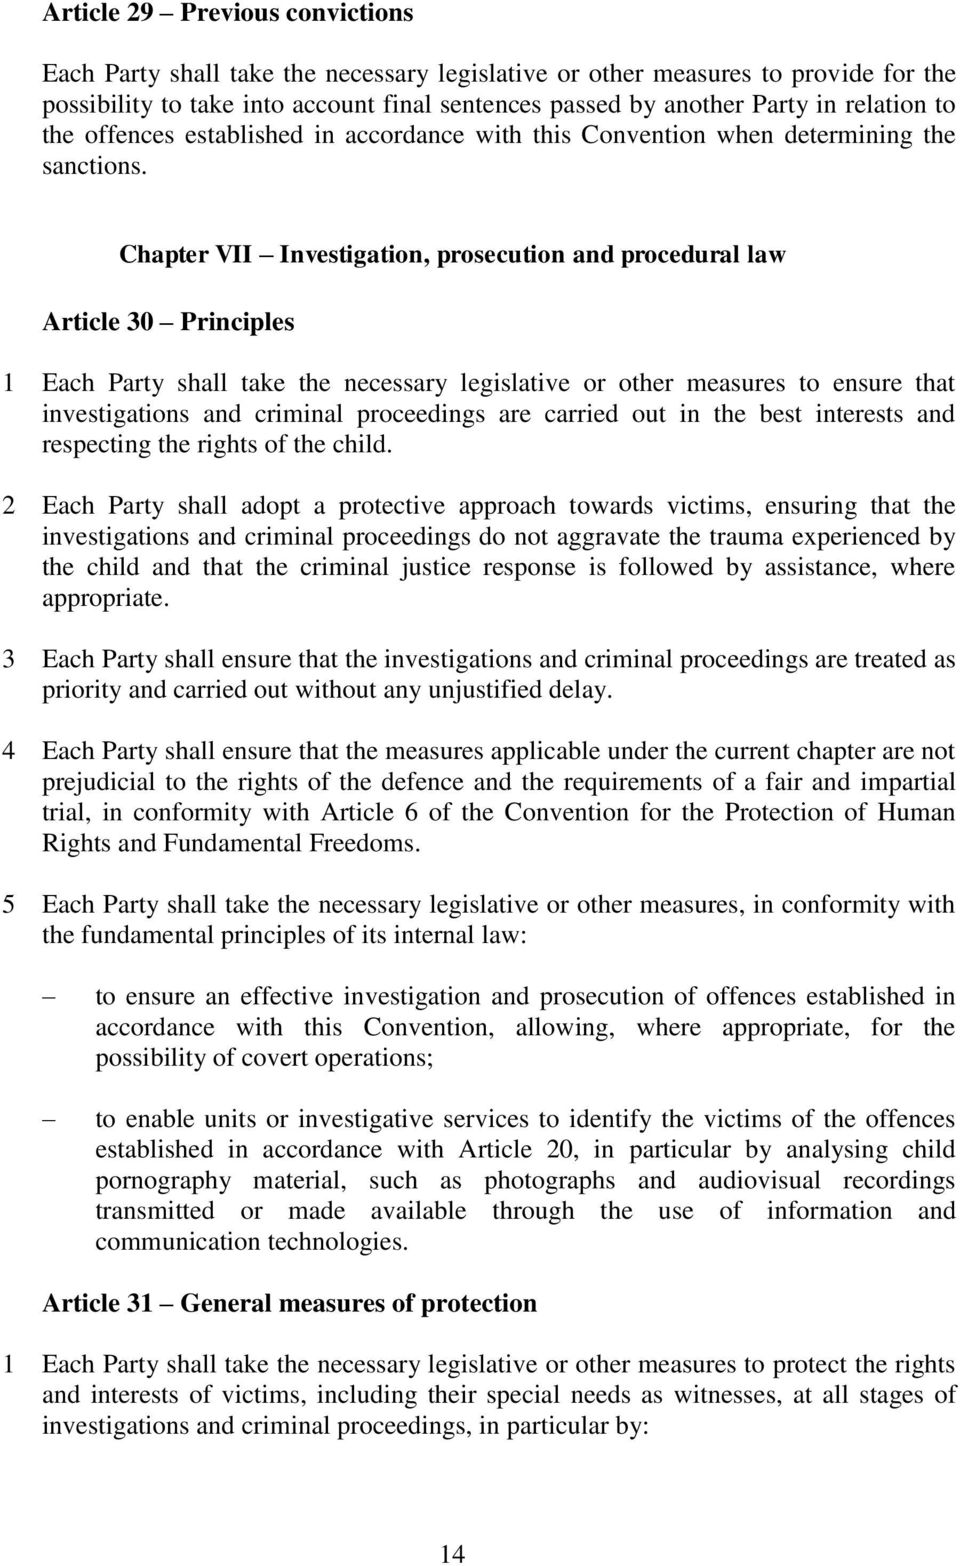 Chapter VII Investigation, prosecution and procedural law Article 30 Principles 1 Each Party shall take the necessary legislative or other measures to ensure that investigations and criminal